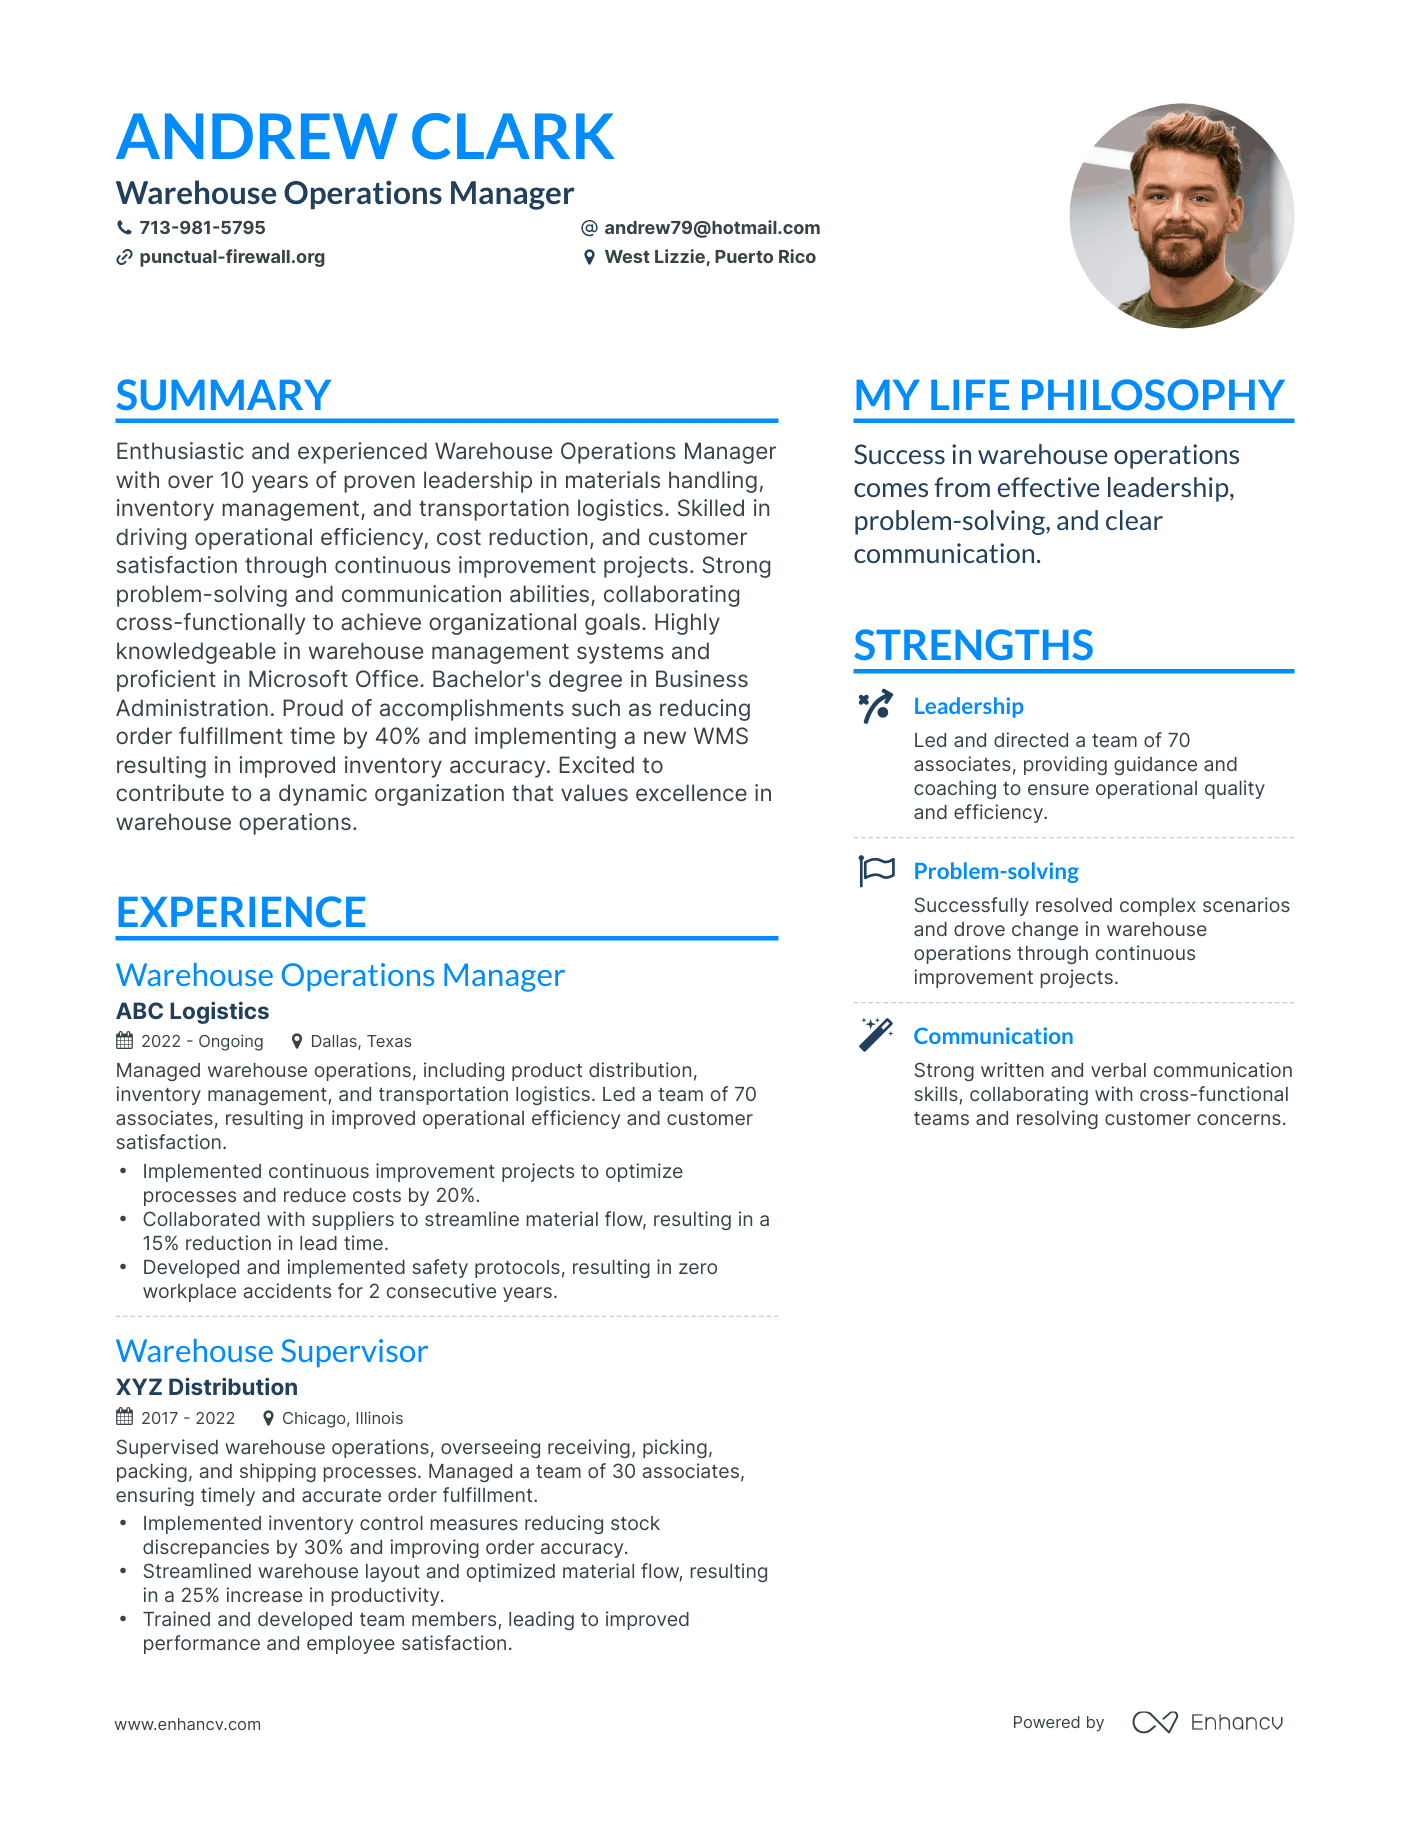 Warehouse Operations Manager resume example